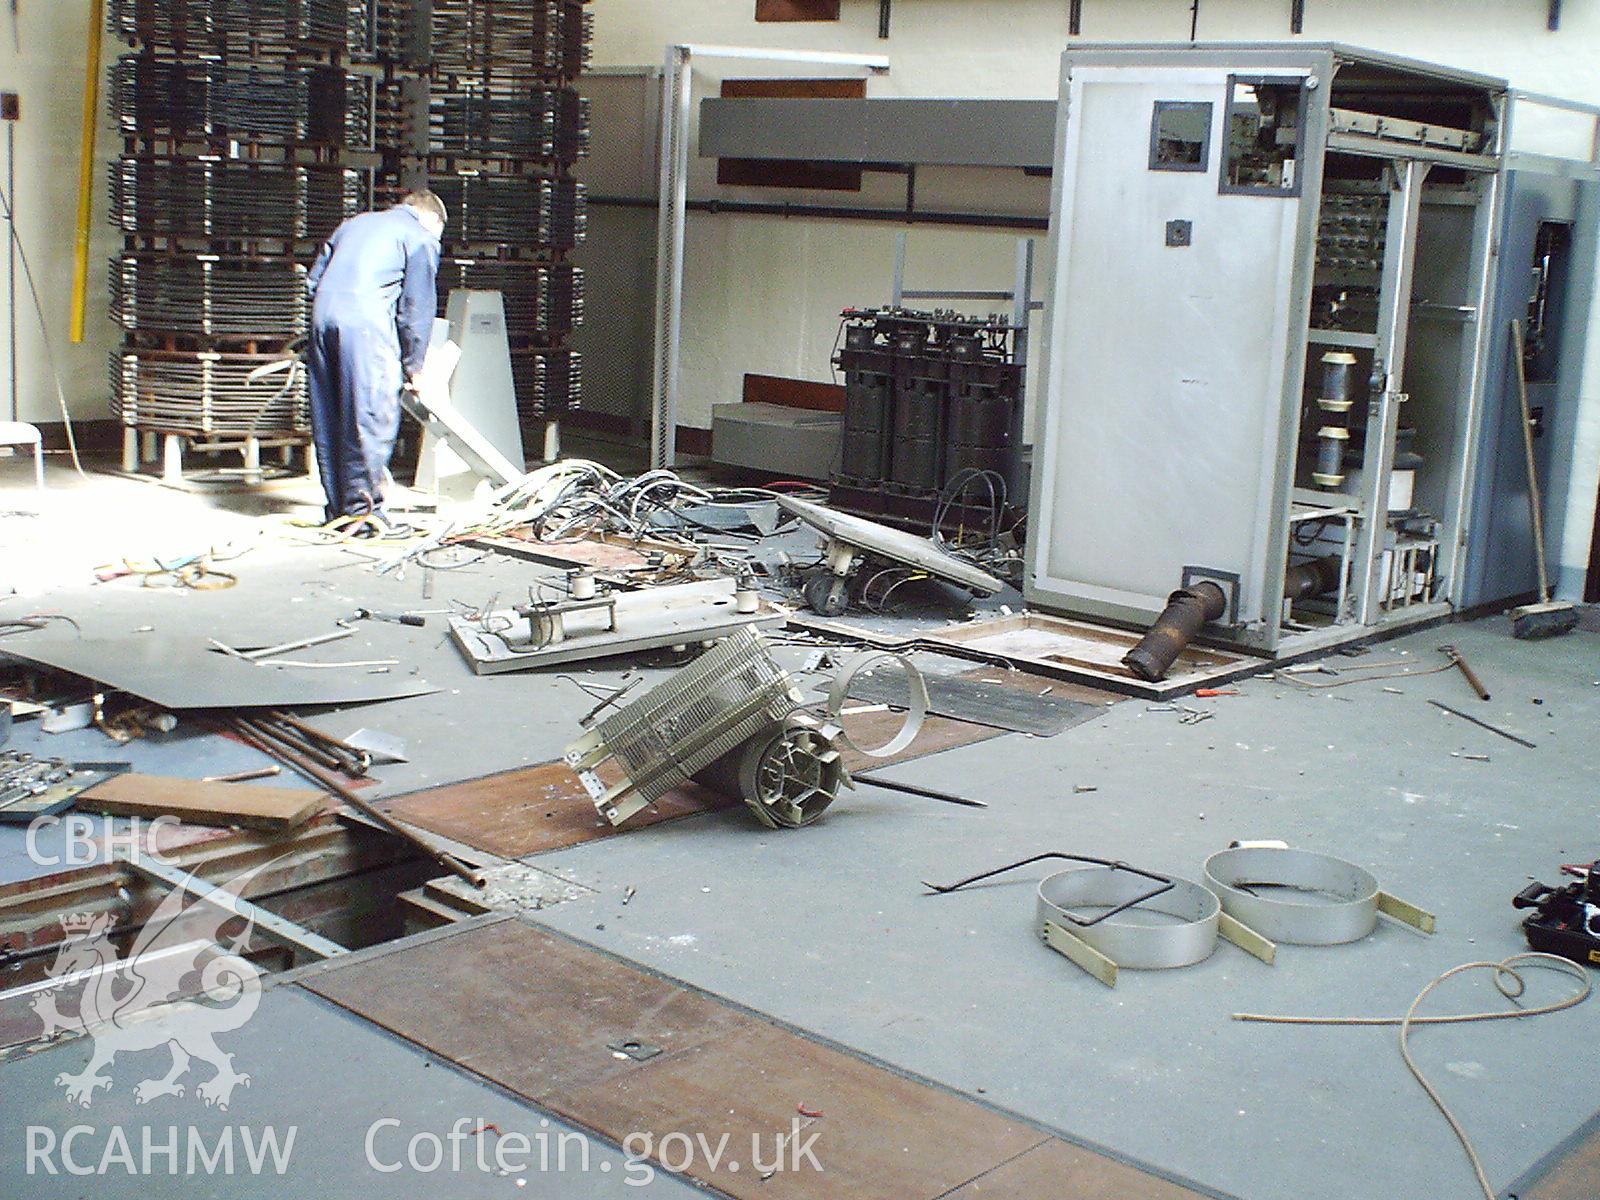 Colour digital photograph of equipment being dismantled.